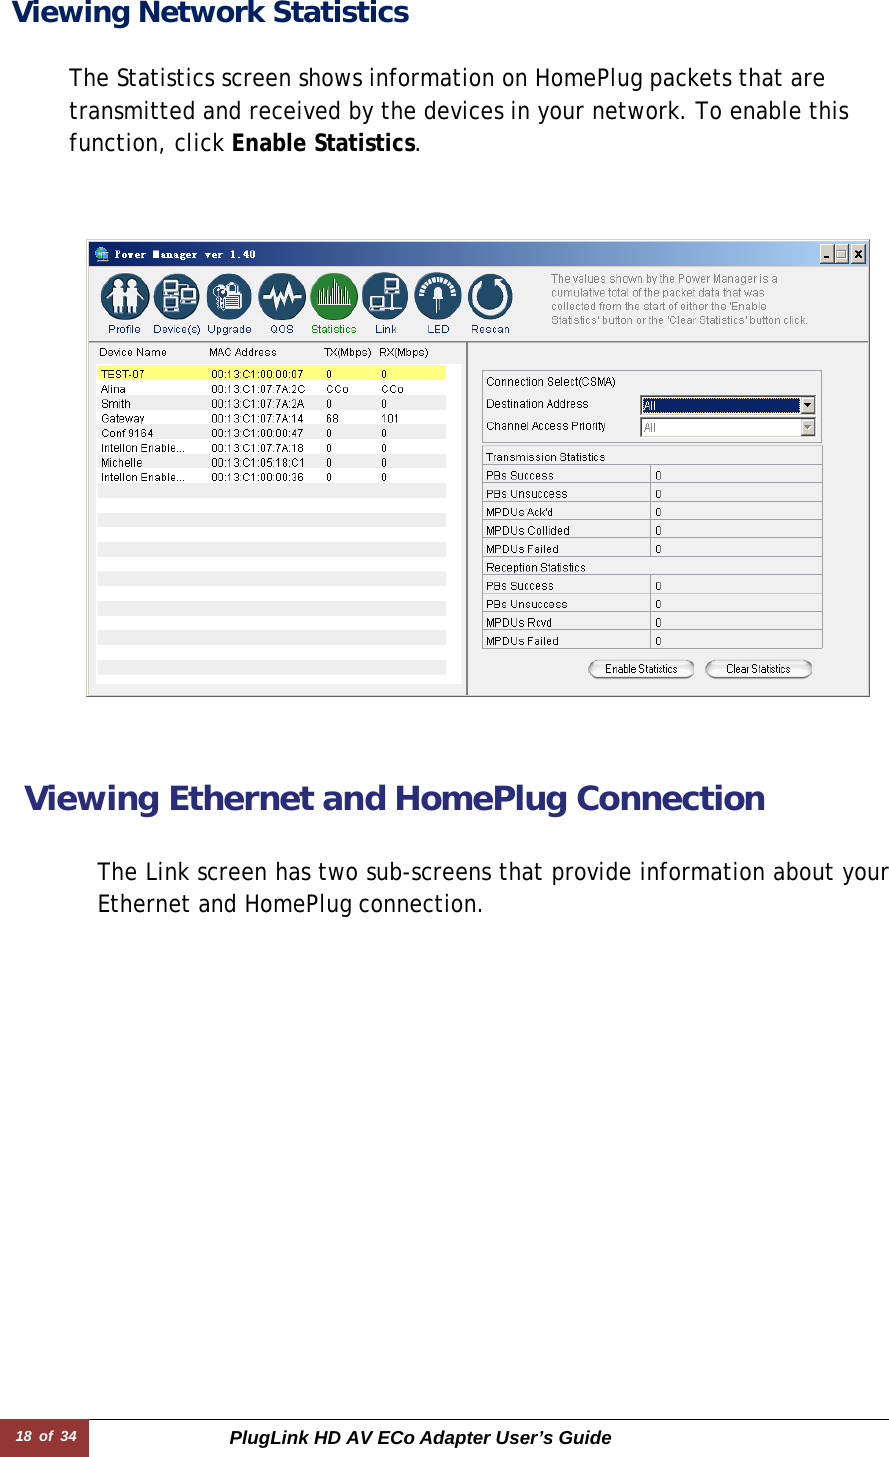 18 of 34  PlugLink HD AV ECo Adapter User’s Guide Viewing Network Statistics          The Statistics screen shows information on HomePlug packets that are transmitted and received by the devices in your network. To enable this function, click Enable Statistics.  Viewing Ethernet and HomePlug Connection   The Link screen has two sub-screens that provide information about yourEthernet and HomePlug connection.  